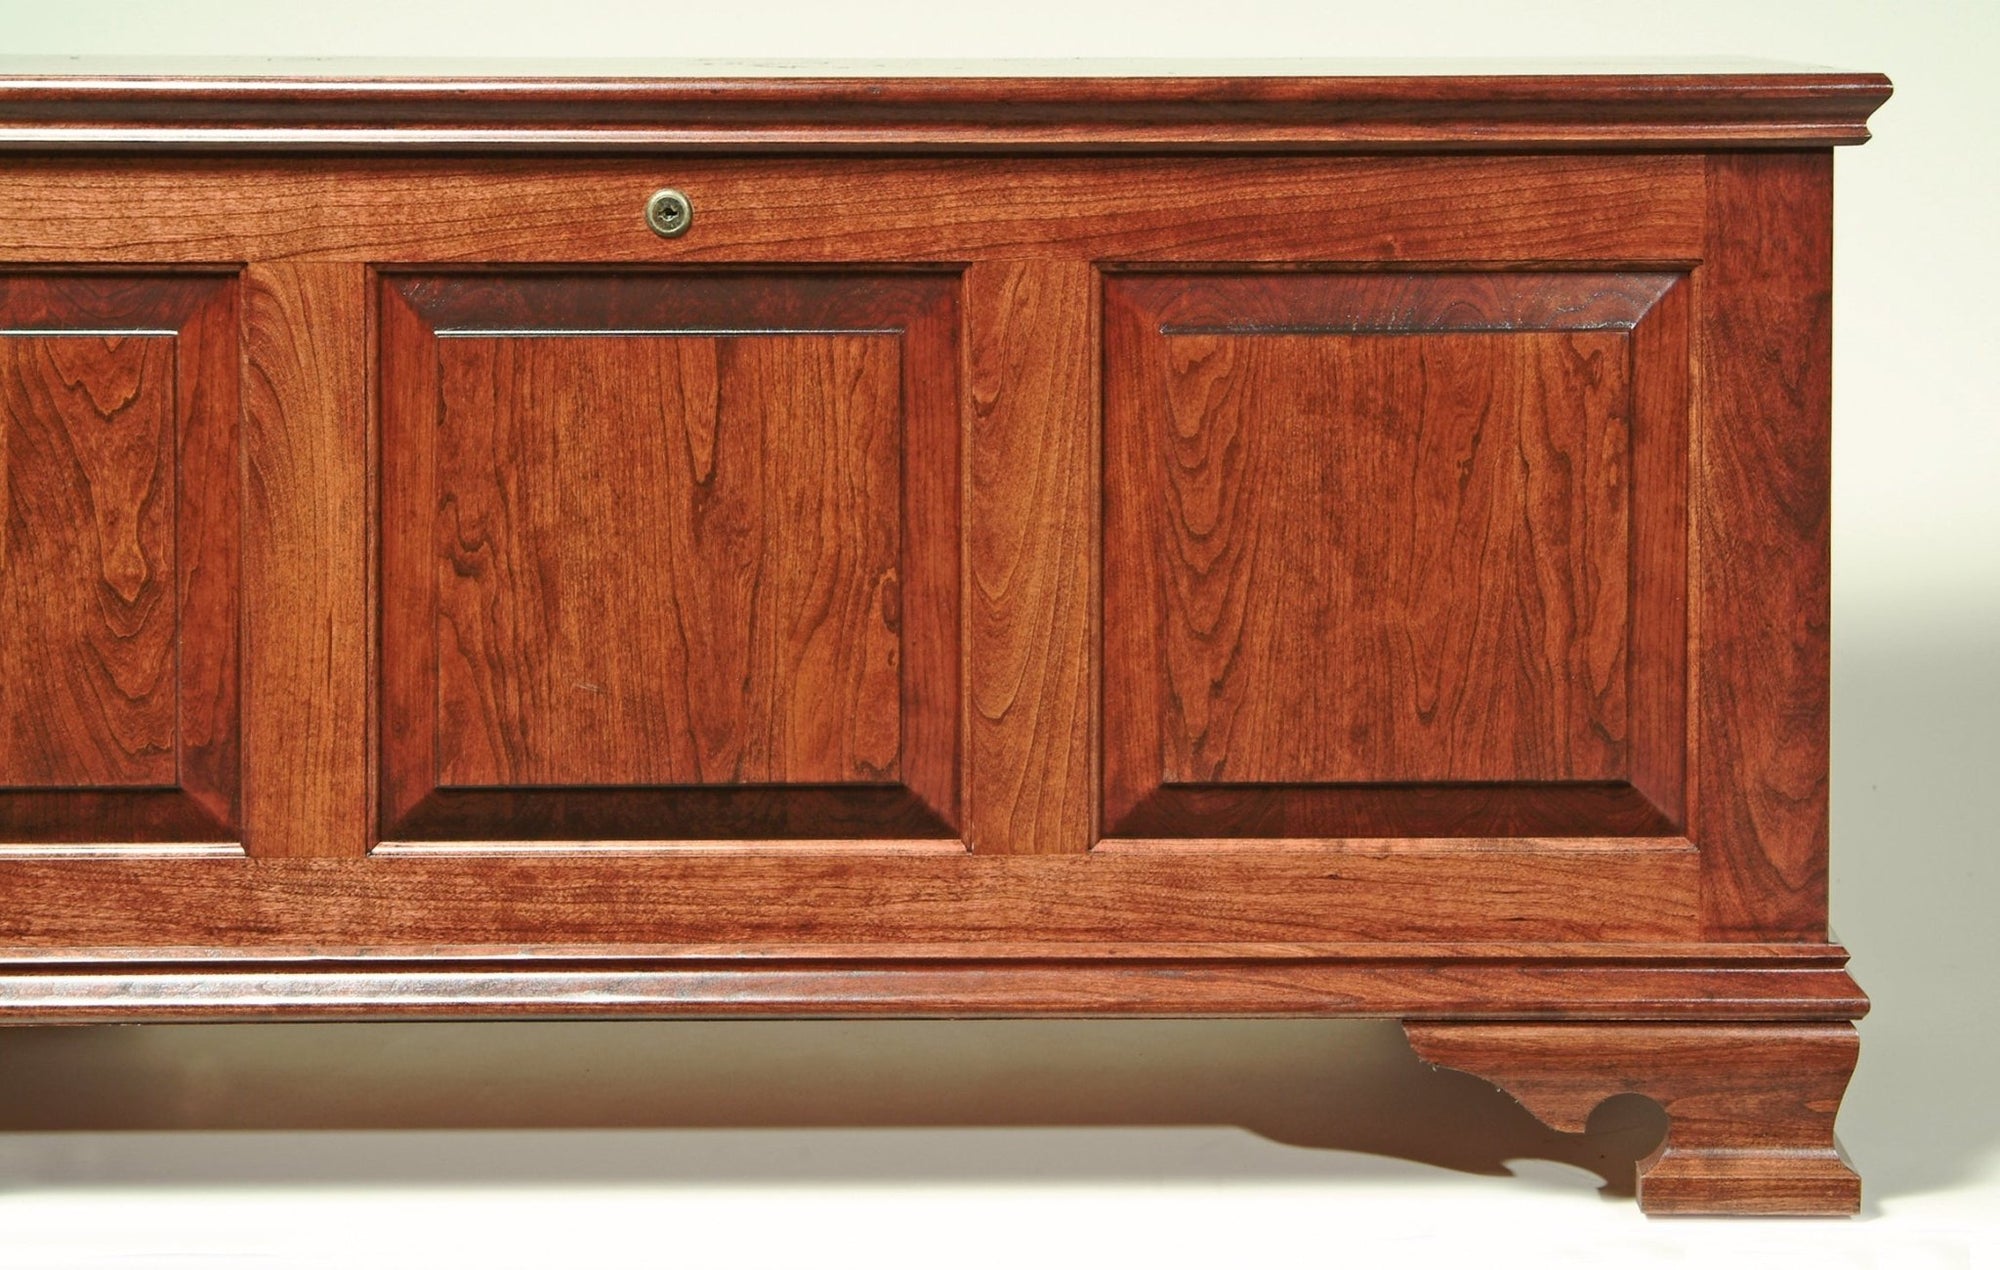 Mayflower Large Classic Panel Chest - Cherry - snyders.furniture